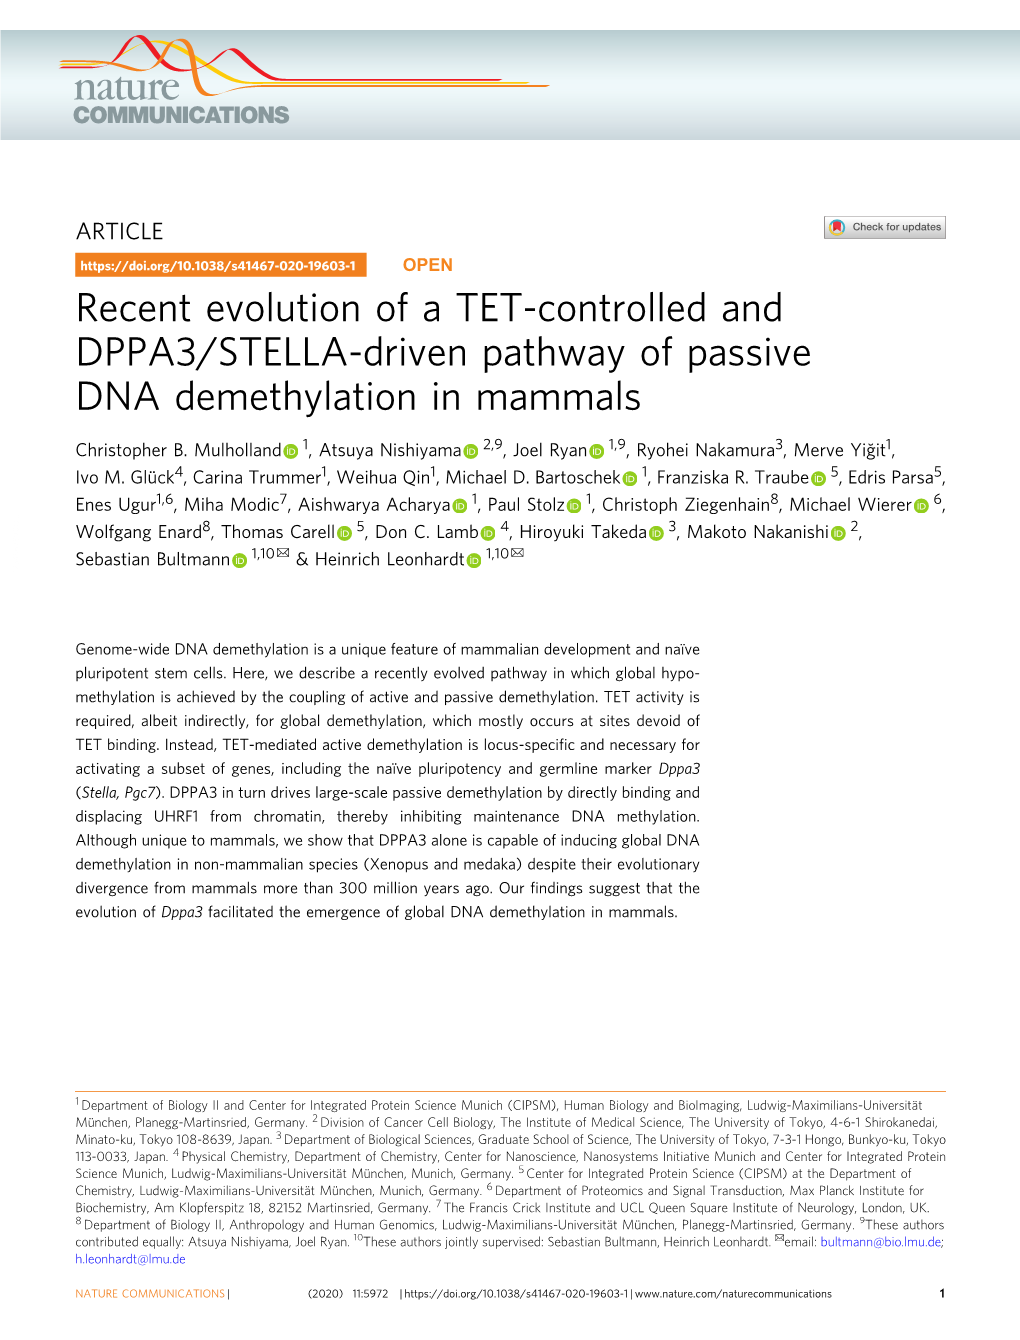 Recent Evolution of a TET-Controlled and DPPA3/STELLA-Driven Pathway of Passive DNA Demethylation in Mammals